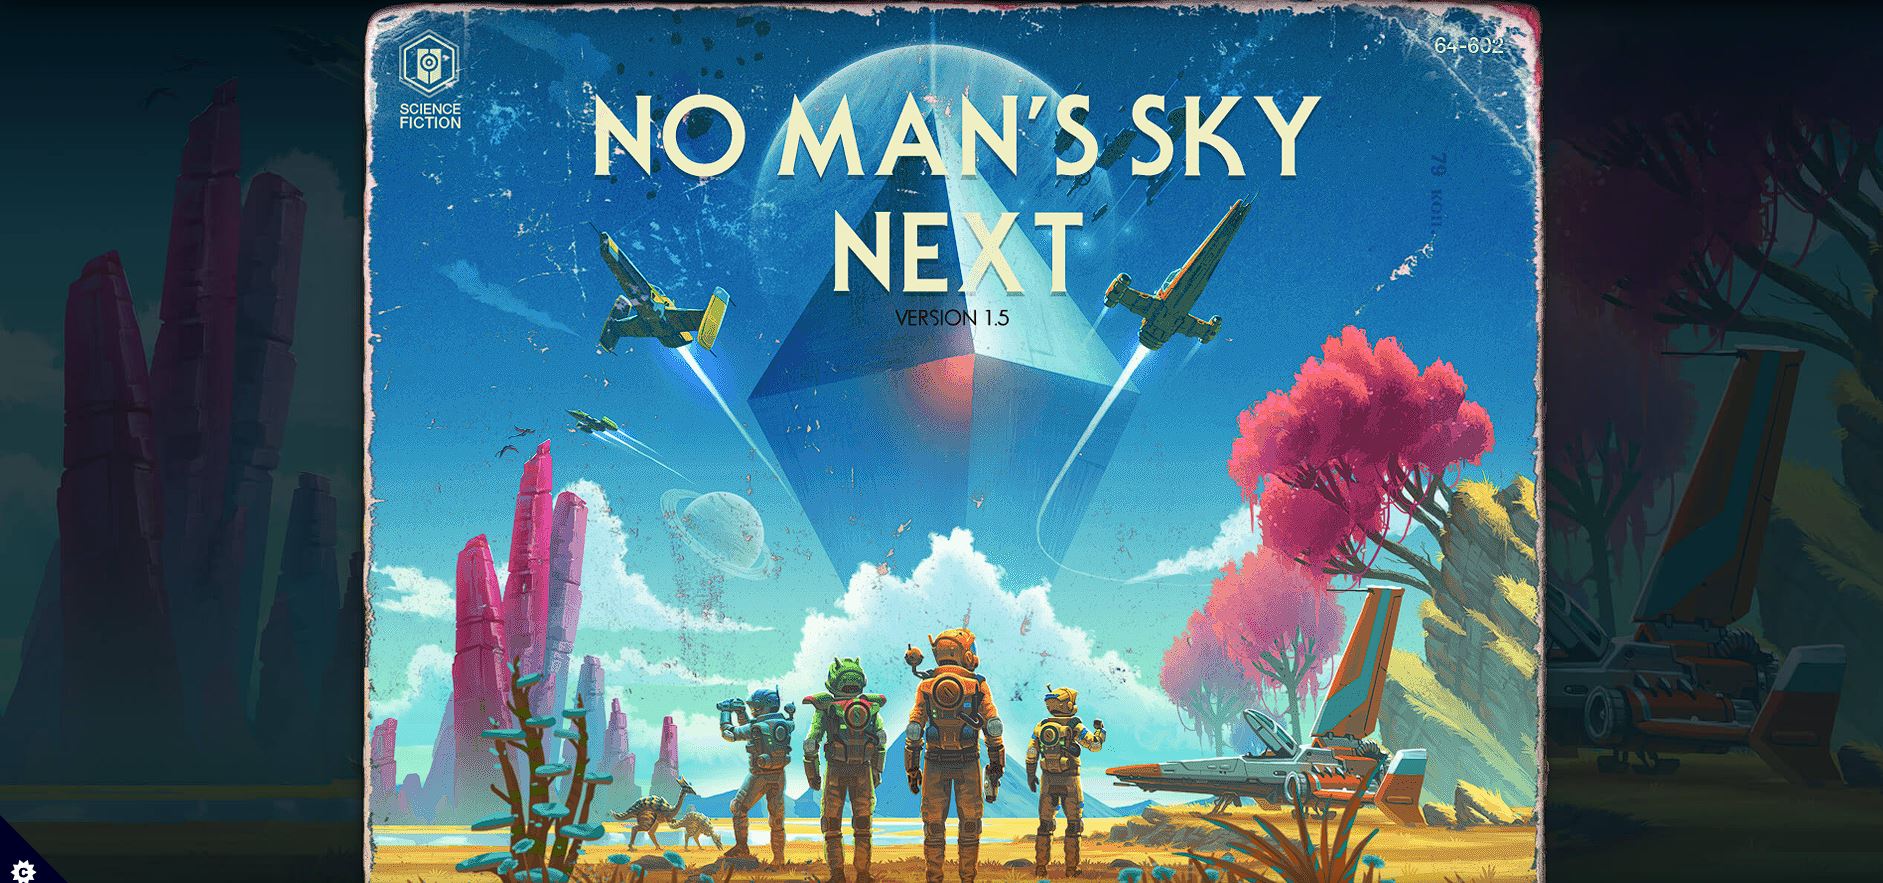 No Man's Sky's Next Update Completely Transformed The Game (via Hello Games).